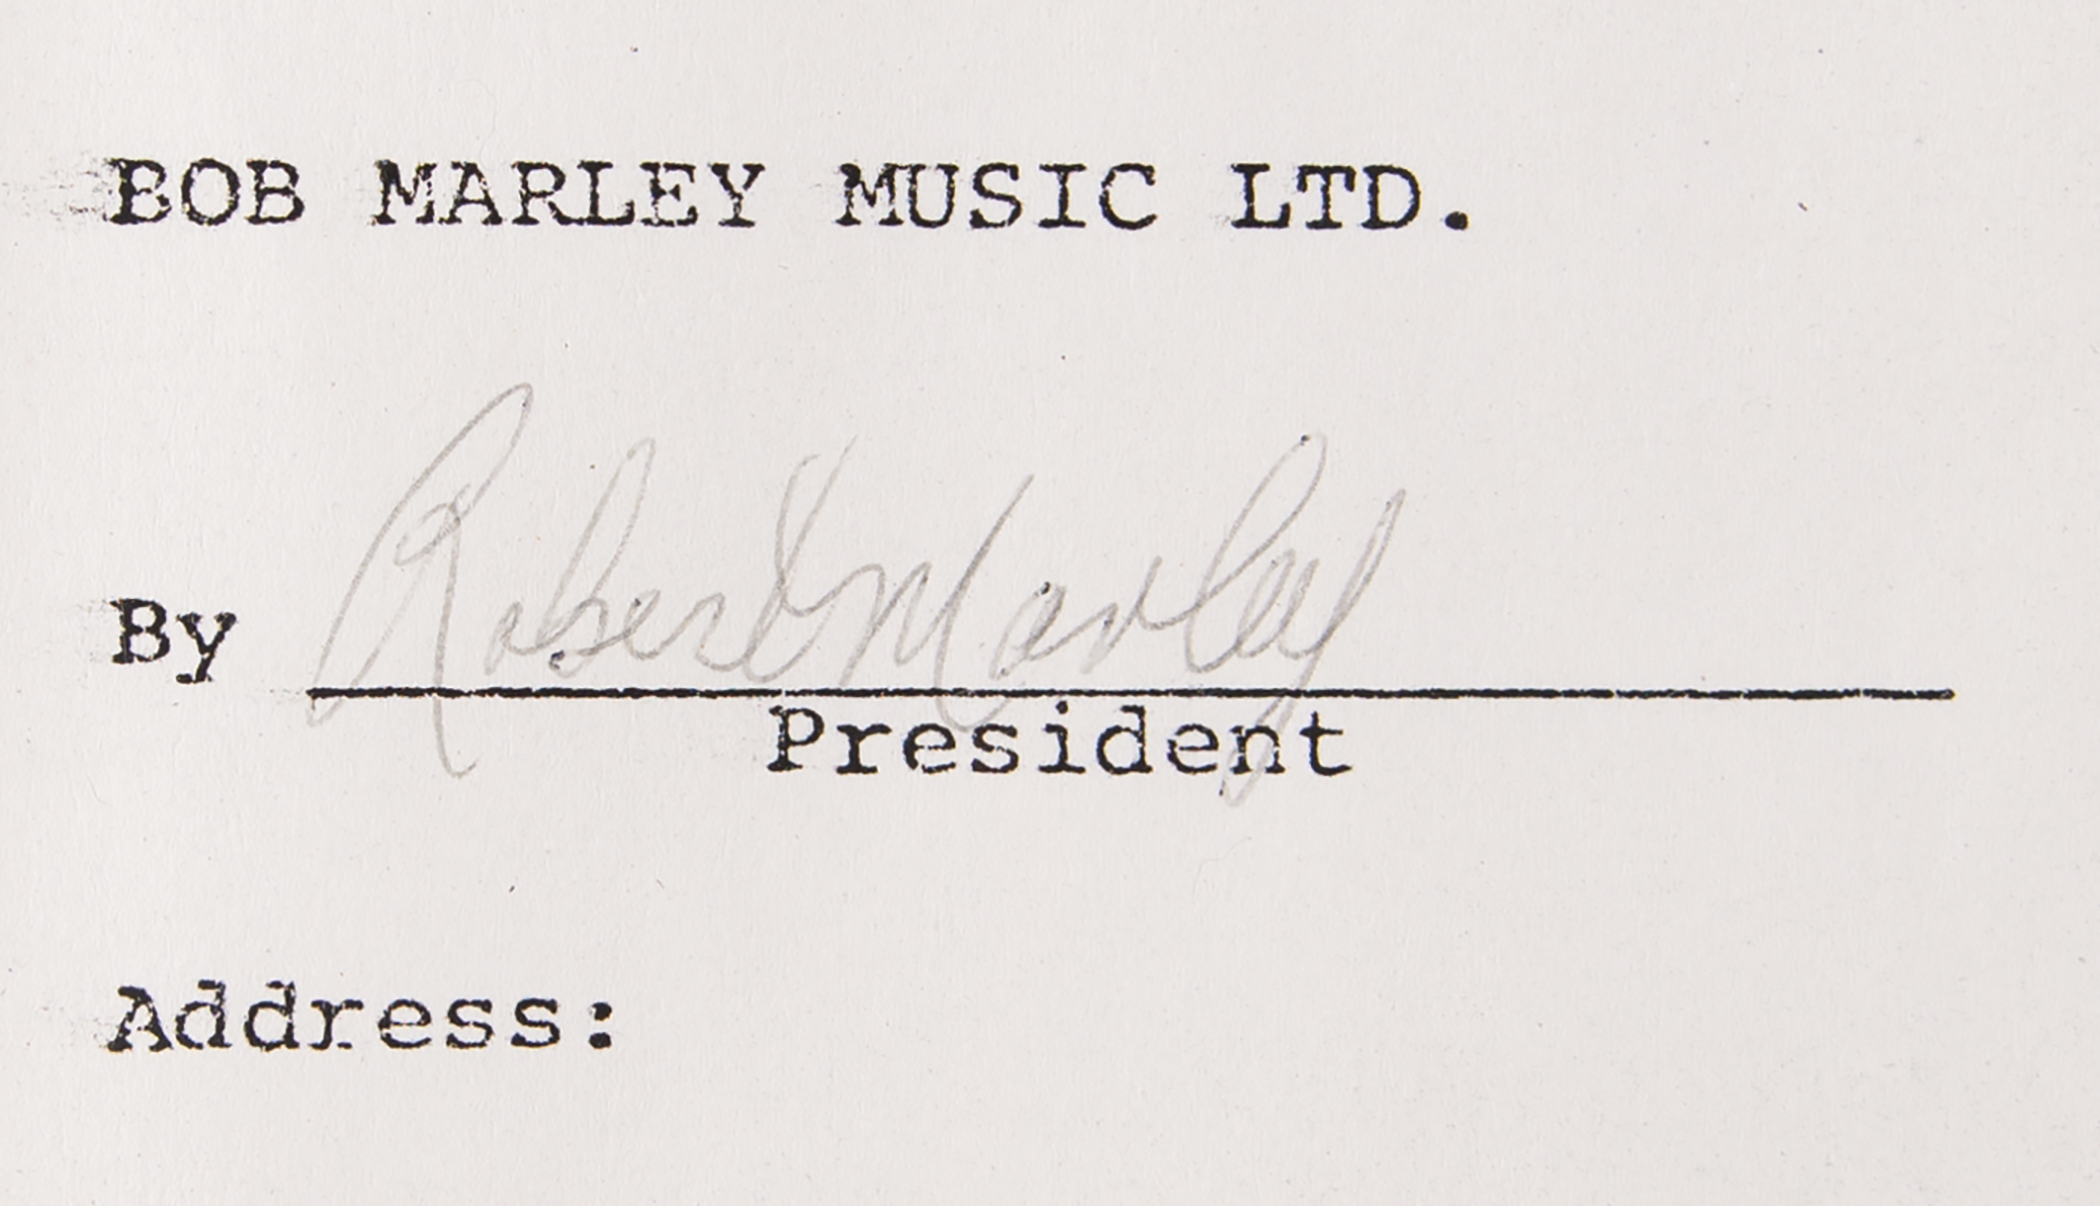 Lot #9155 Bob Marley Twice-Signed Music Contract, with Rare "Robert Marley" Signature - Image 5